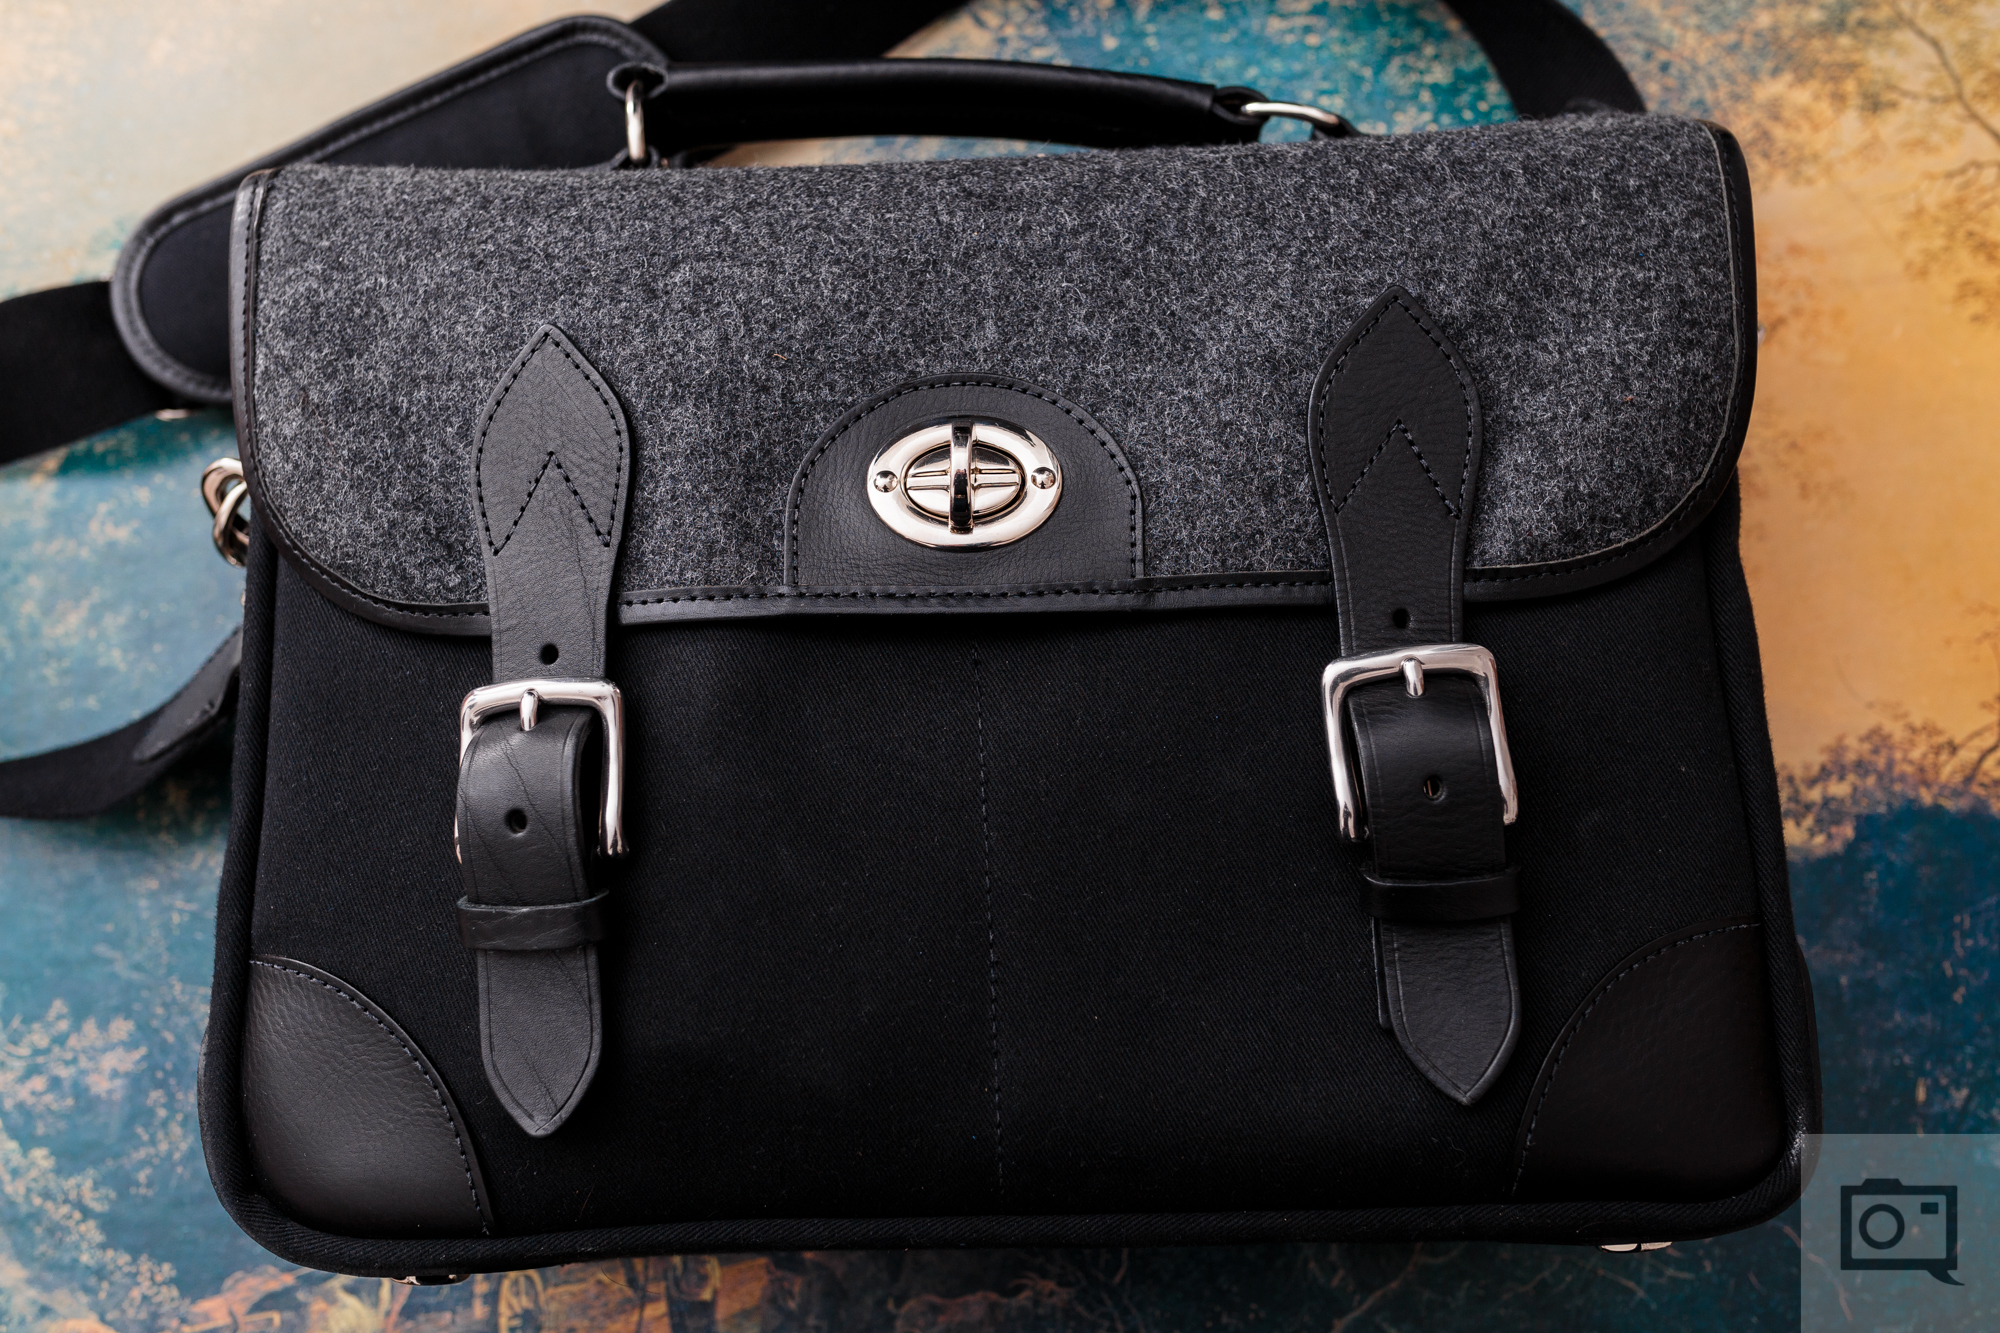 Hawkesmill St. James's Street Camera Bag Review